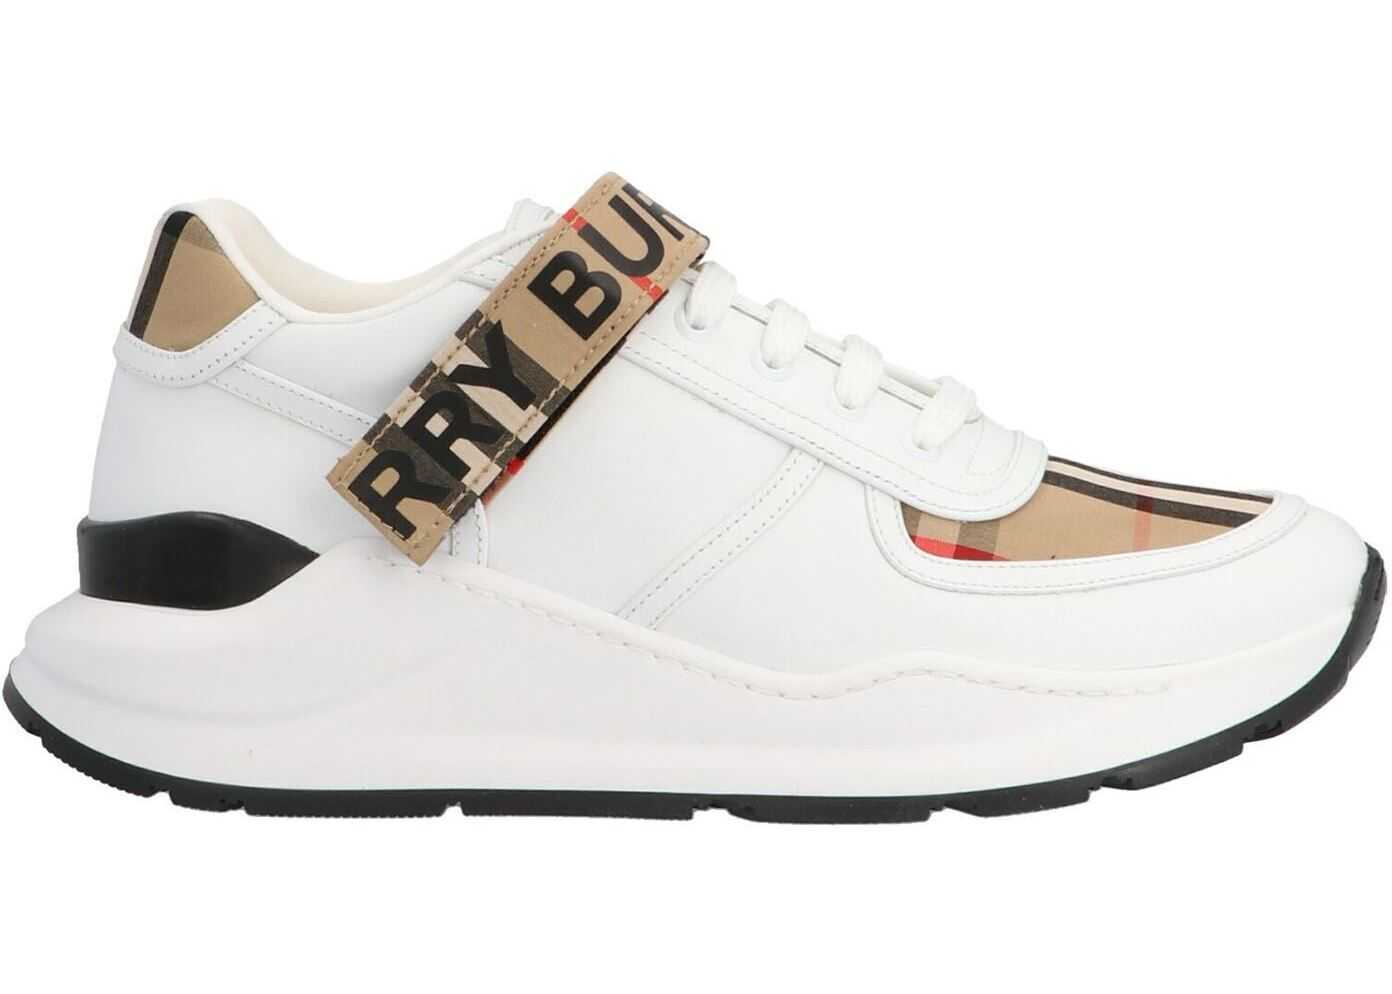 Burberry Ronnie Sneakers In White 8025543 White